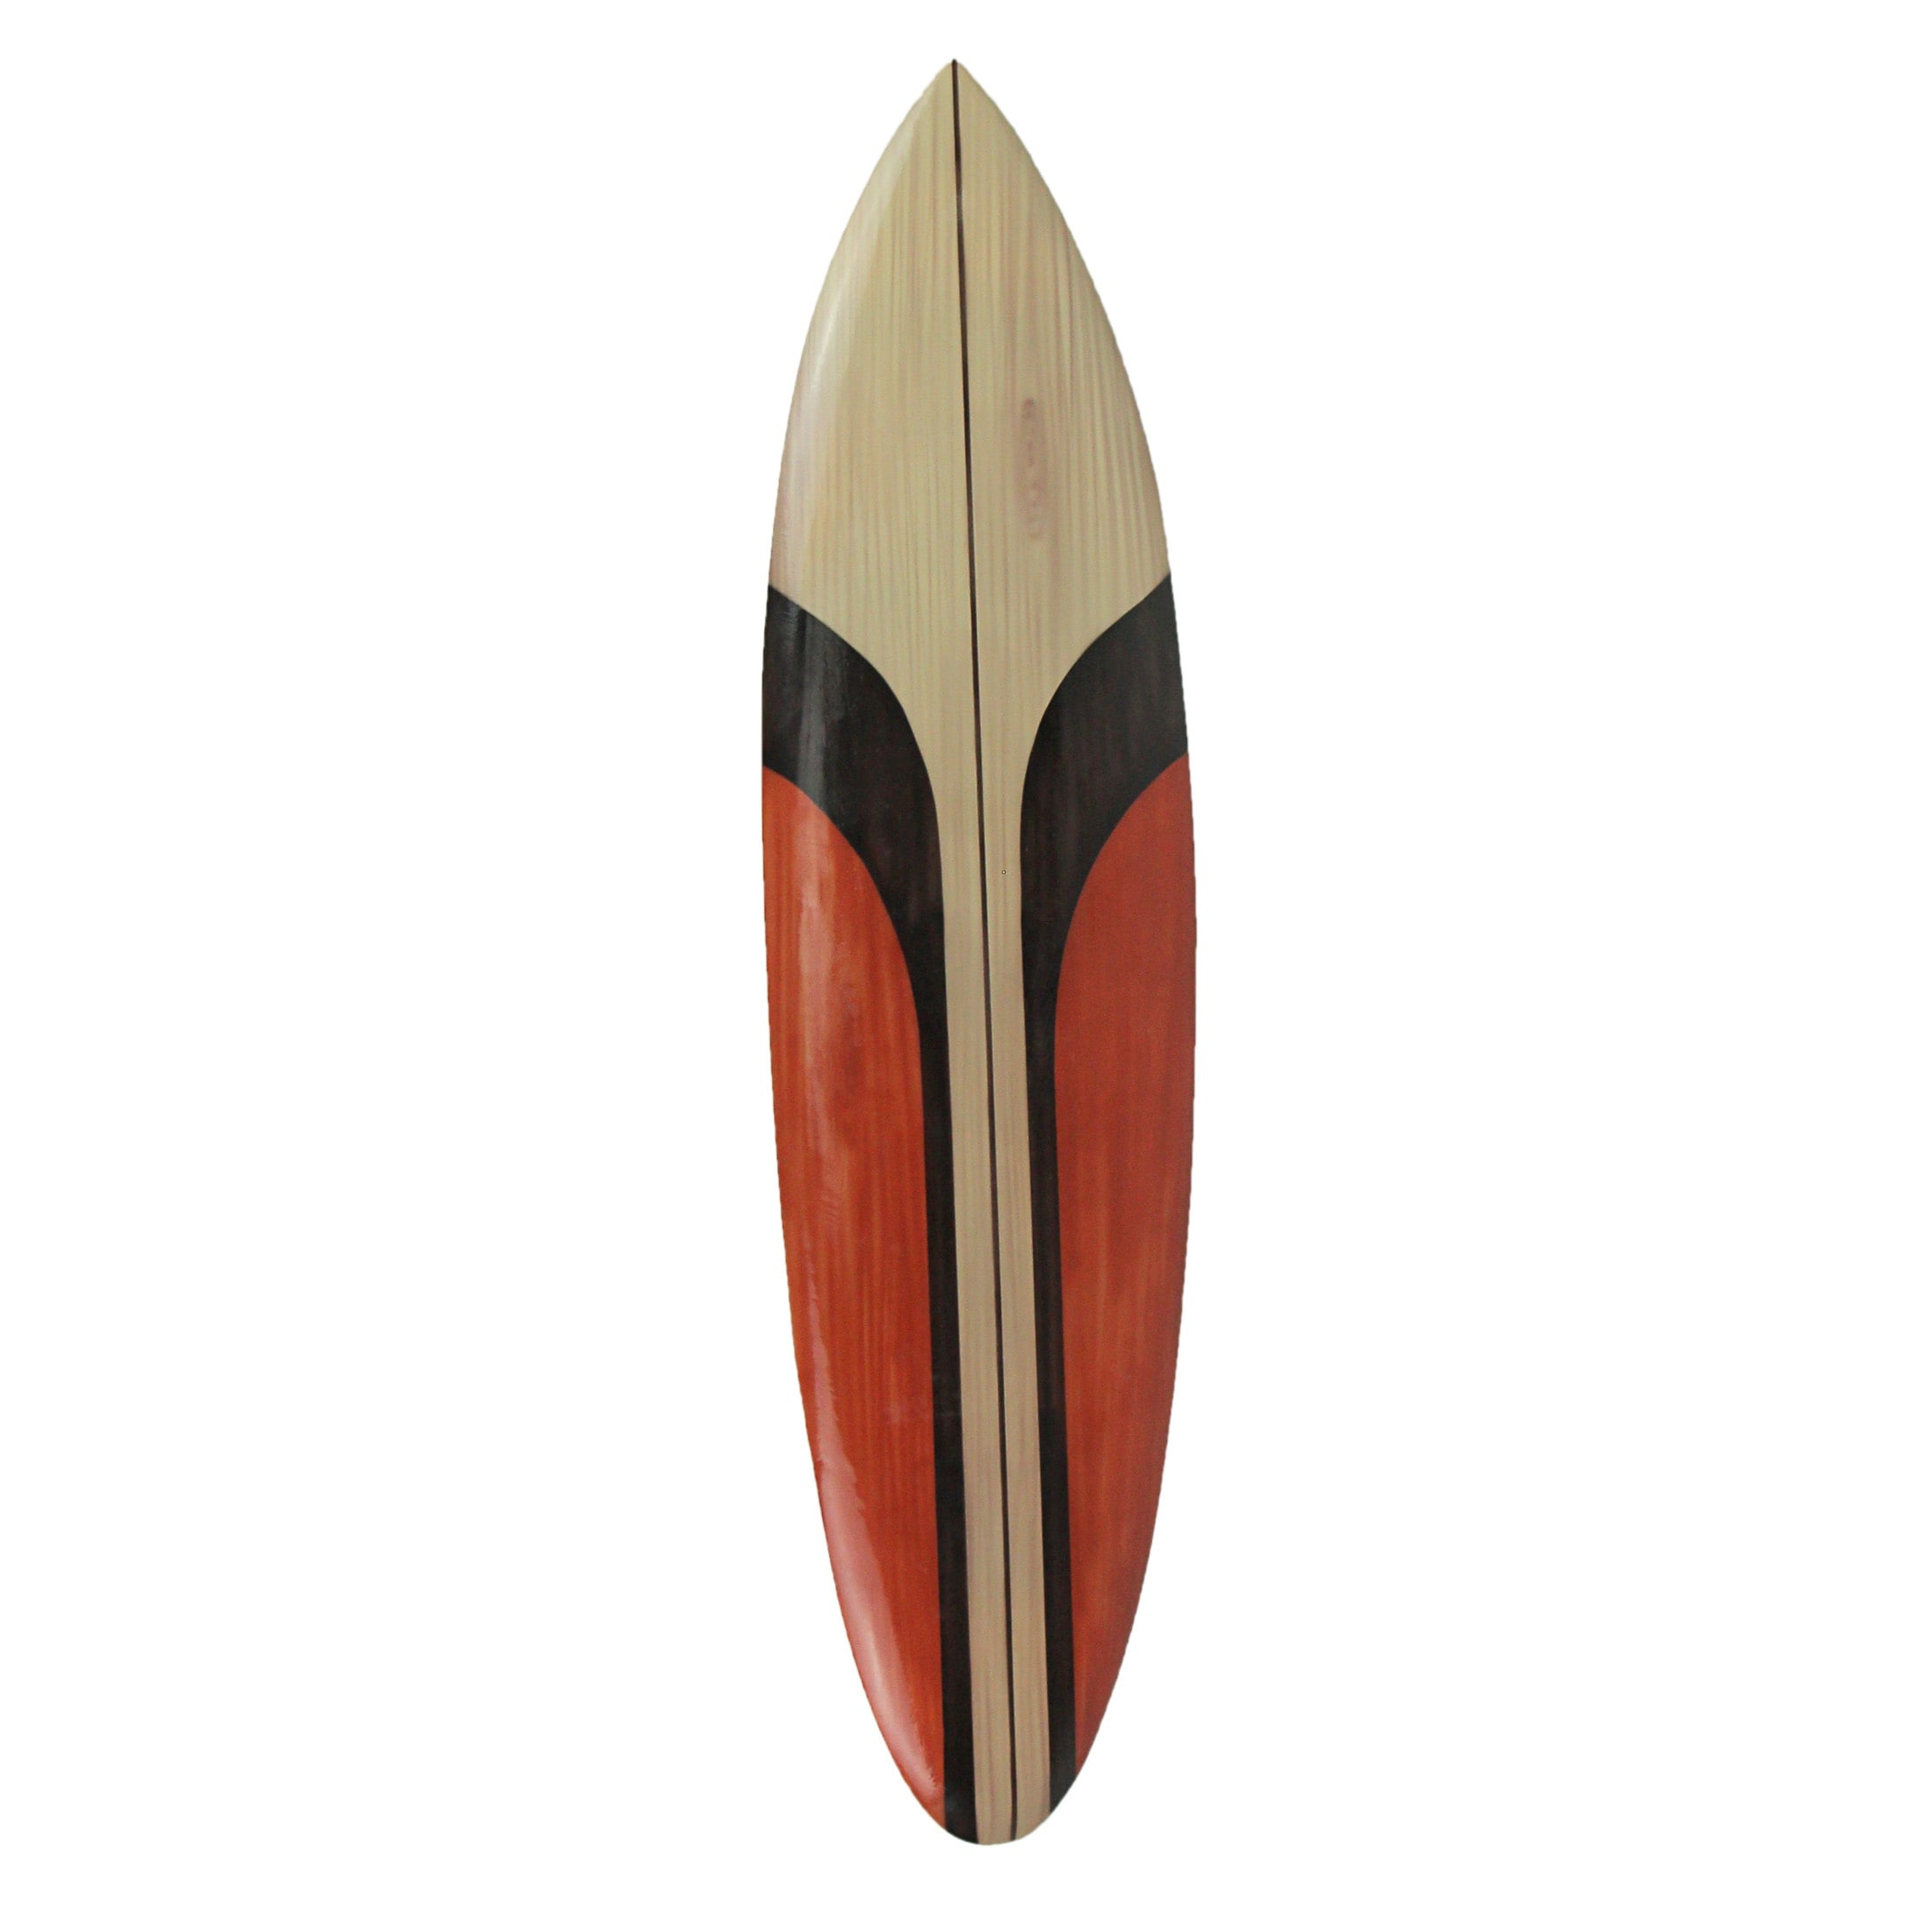 39 Inch Hand Carved Painted Wooden Surfboard Wall Hanging Decor Beach Bed  Bath  Beyond 36718830